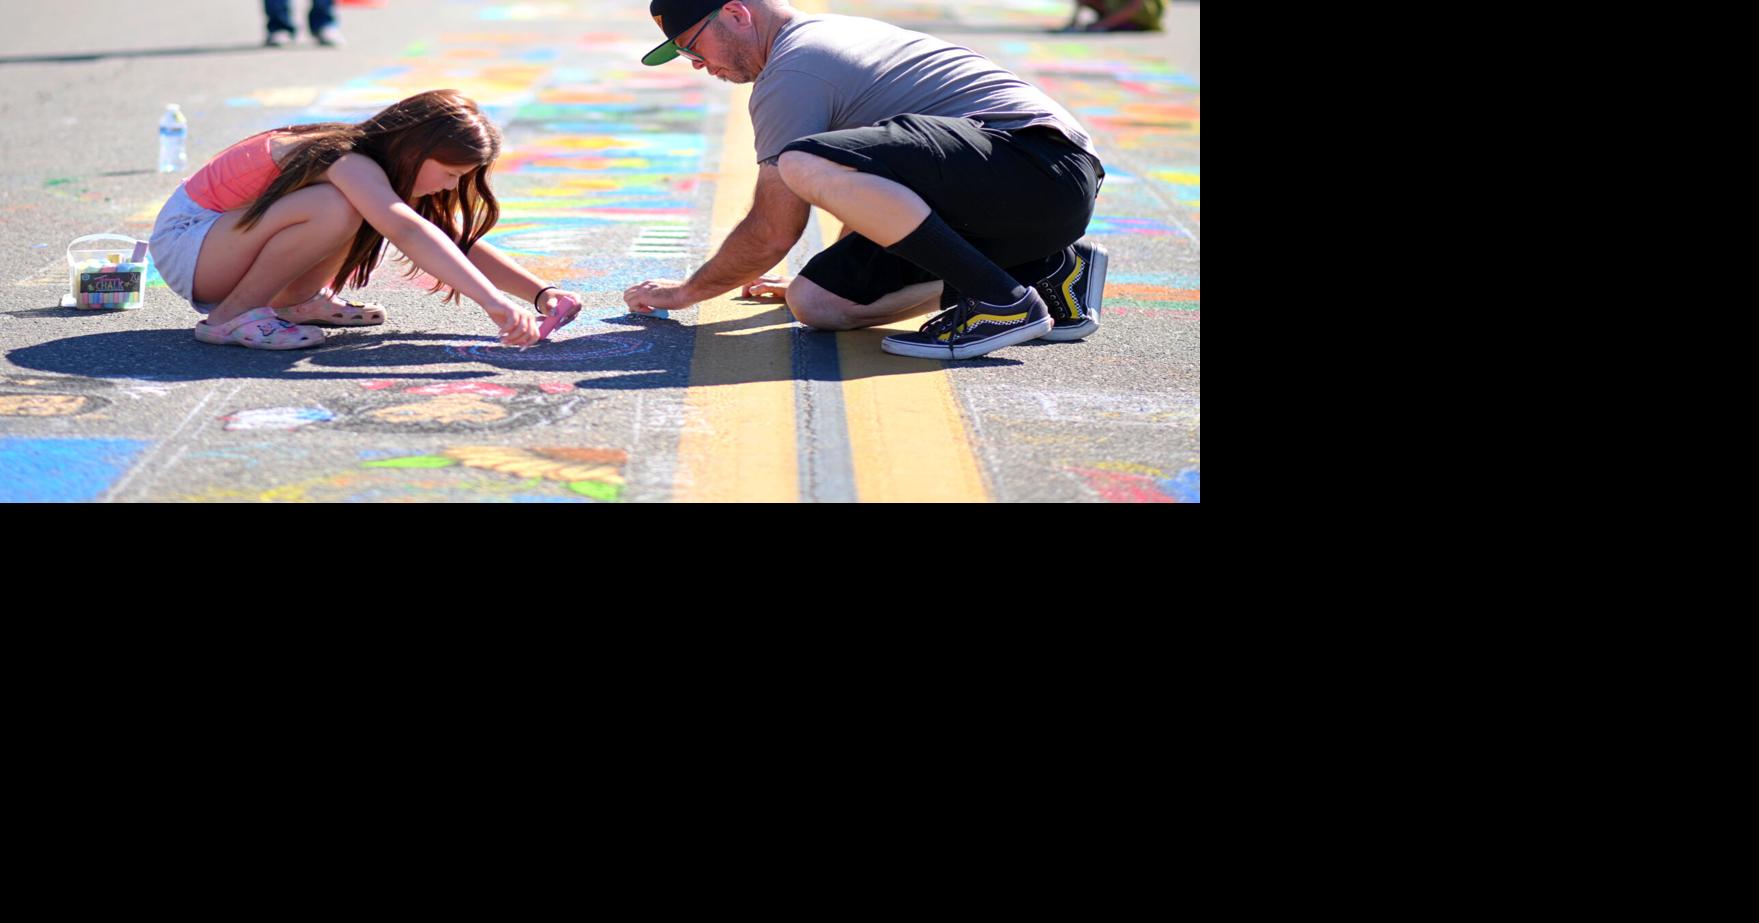 Annual Old Town Chalk Festival fills Orcutt with art, artists Photos